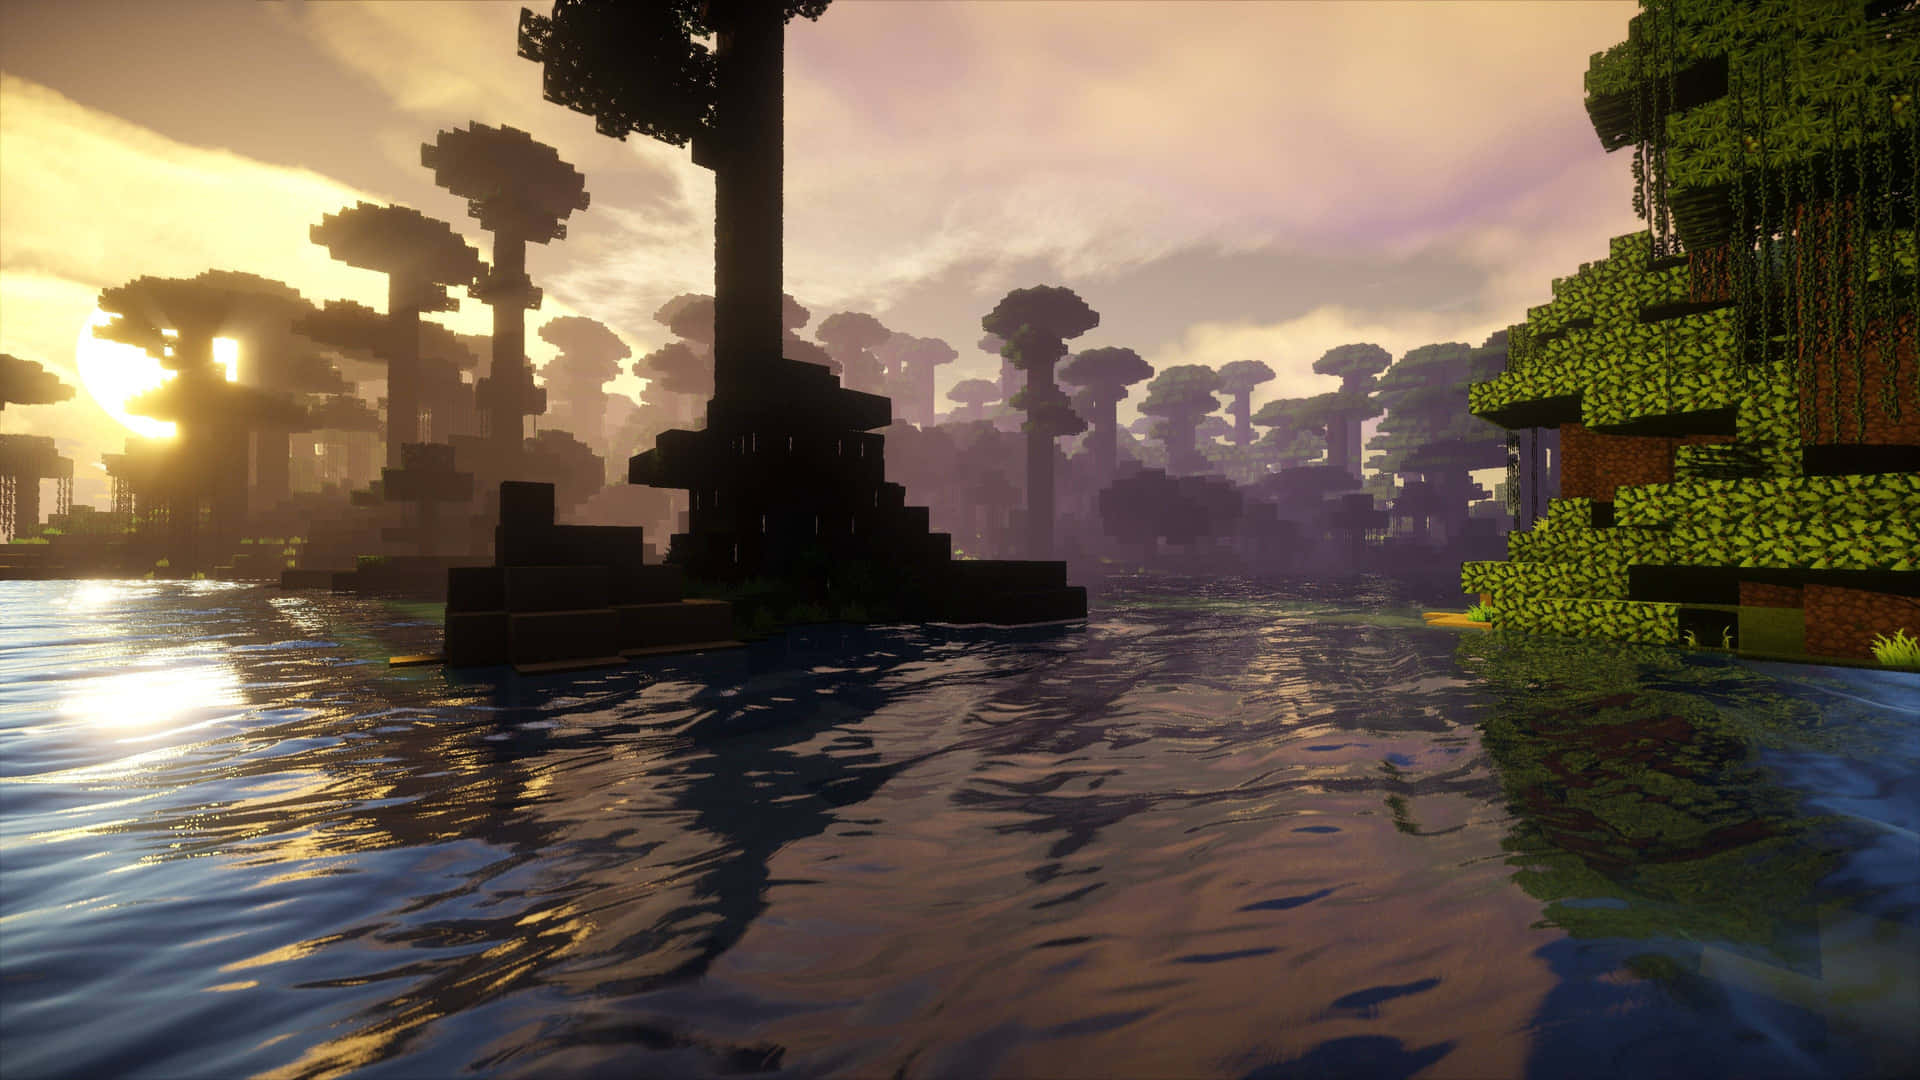 A view of the horizon at sunset in the game of Minecraft Wallpaper